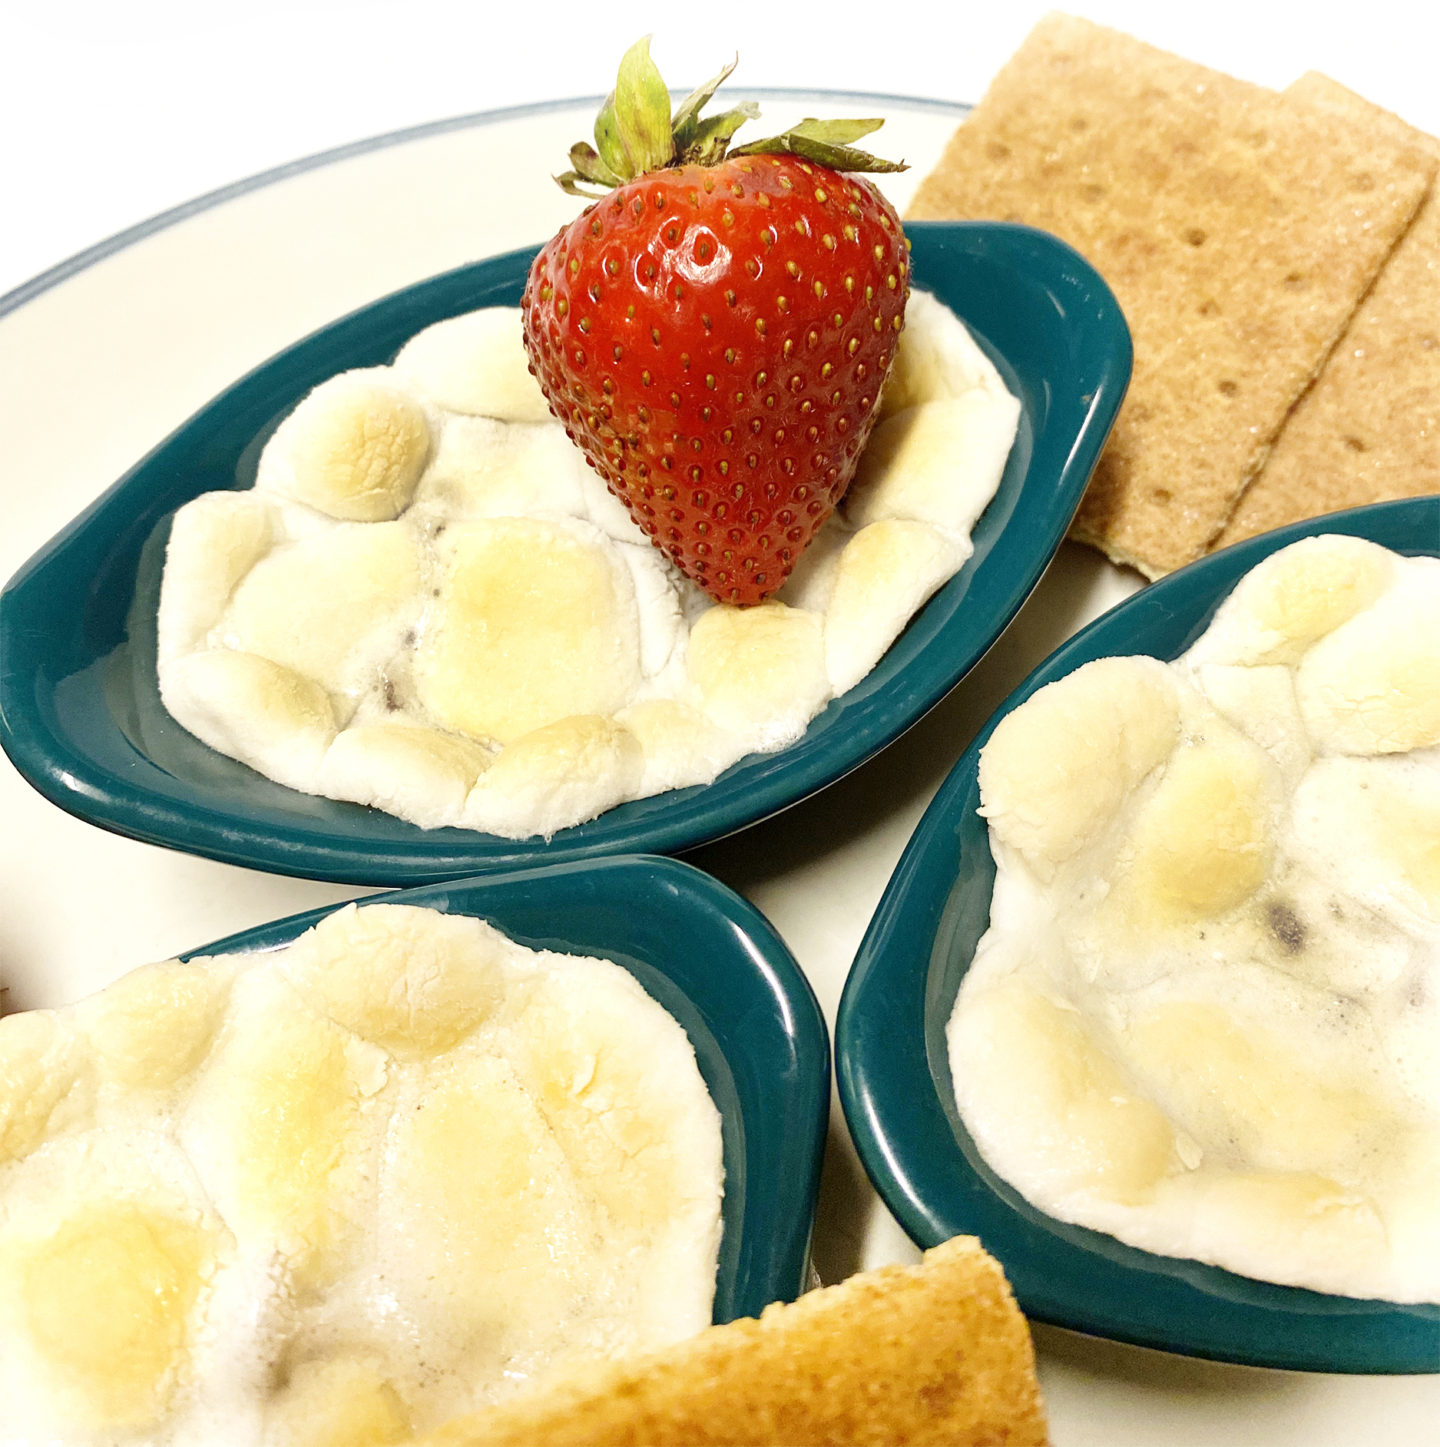 s'mores dip with graham crackers and strawberries in small dipping cups